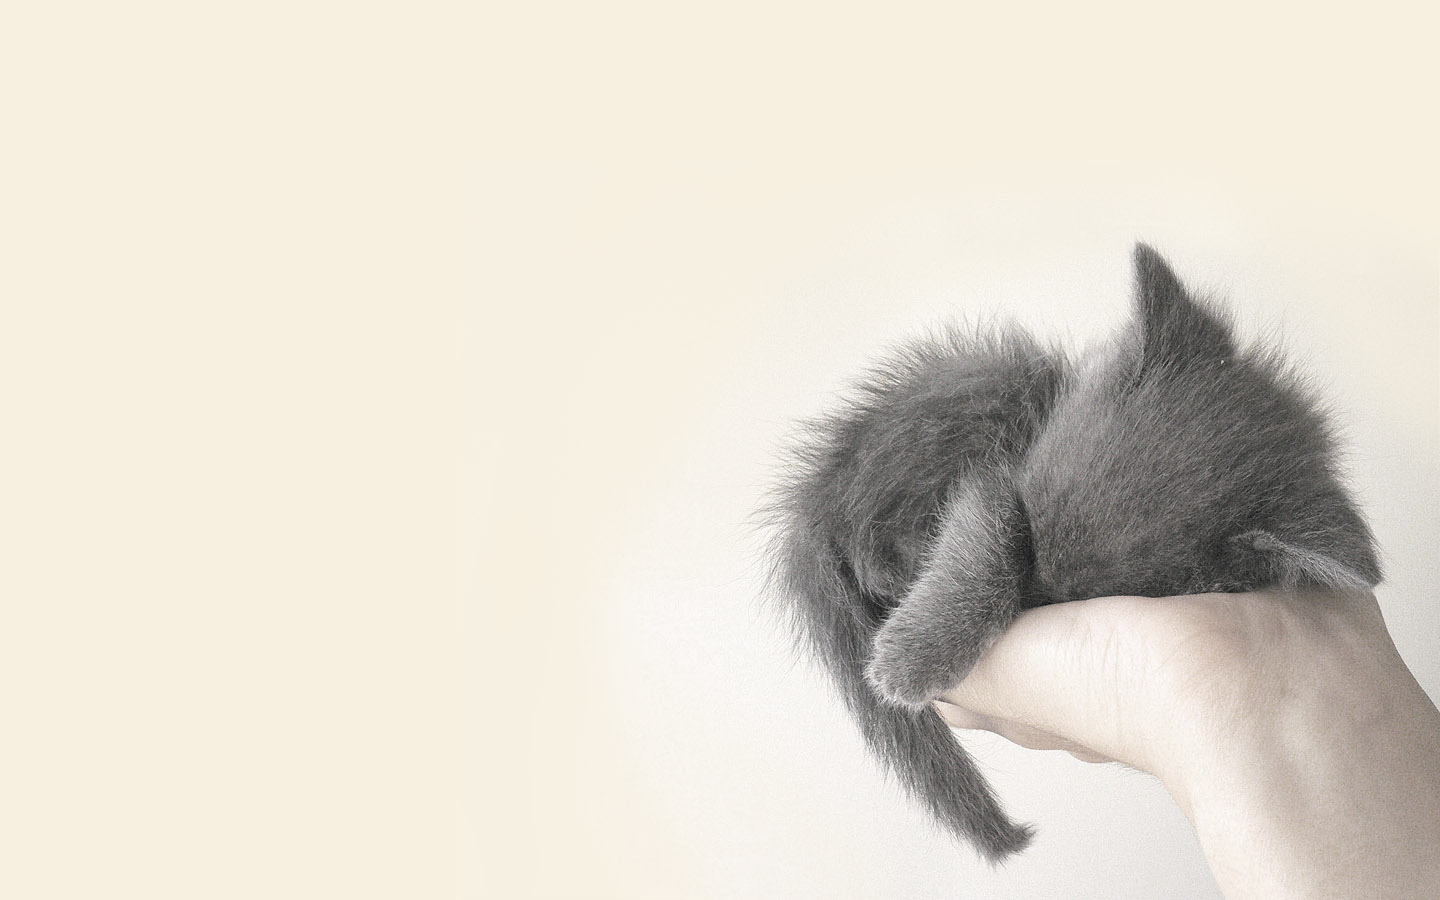 Someone Holding a Cute Grey Kitten in their Hand